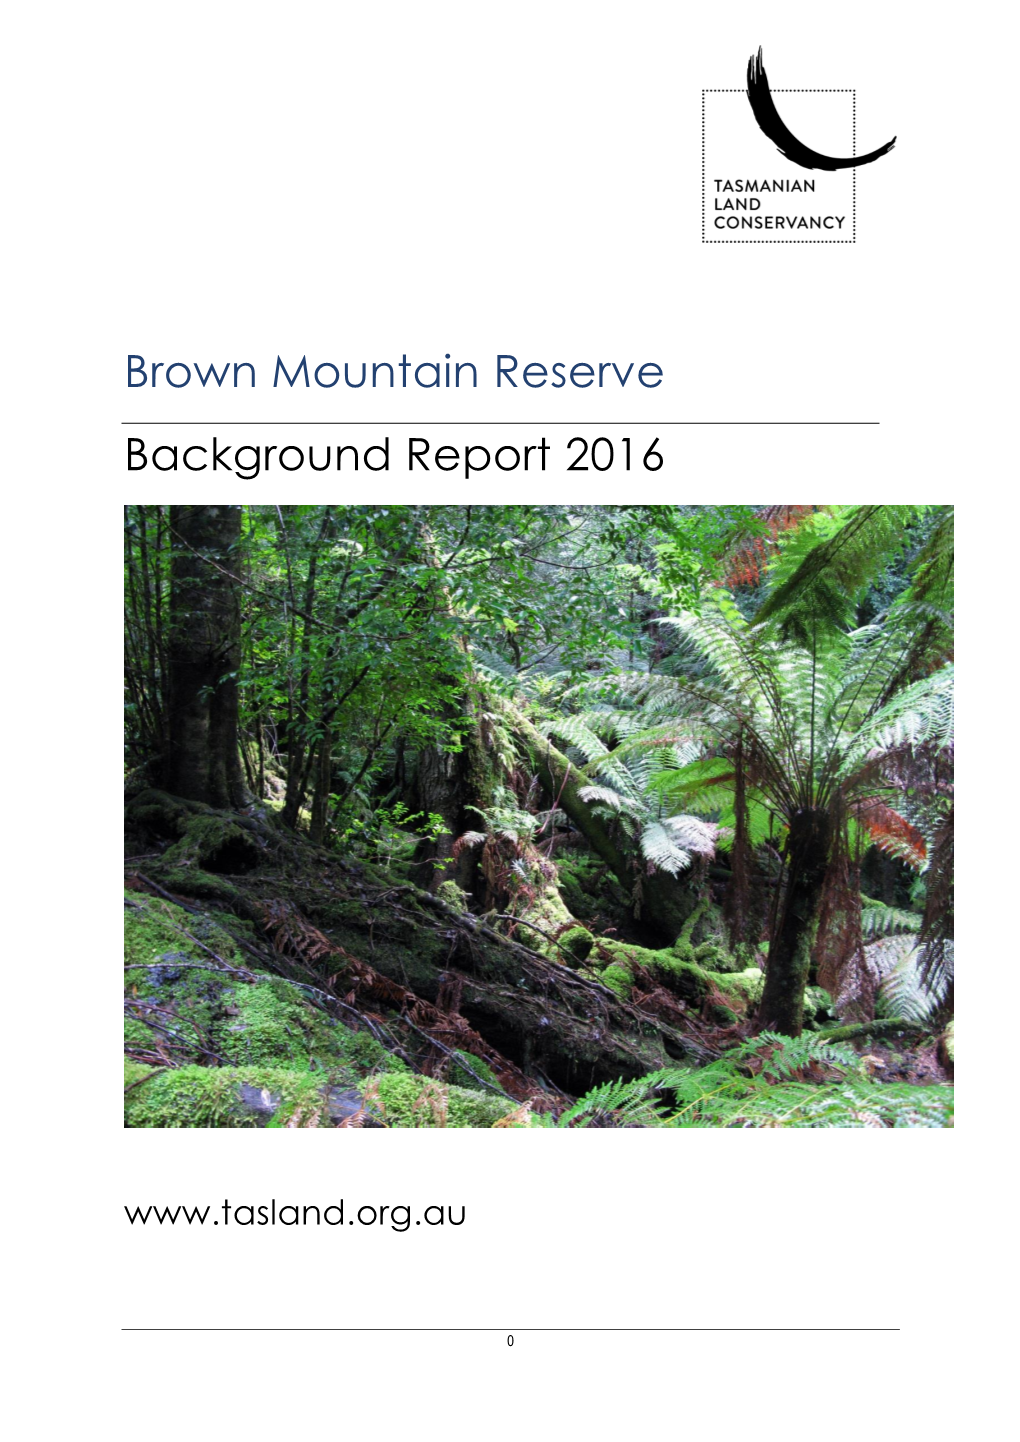 Brown Mountain Reserve Background Report 2016